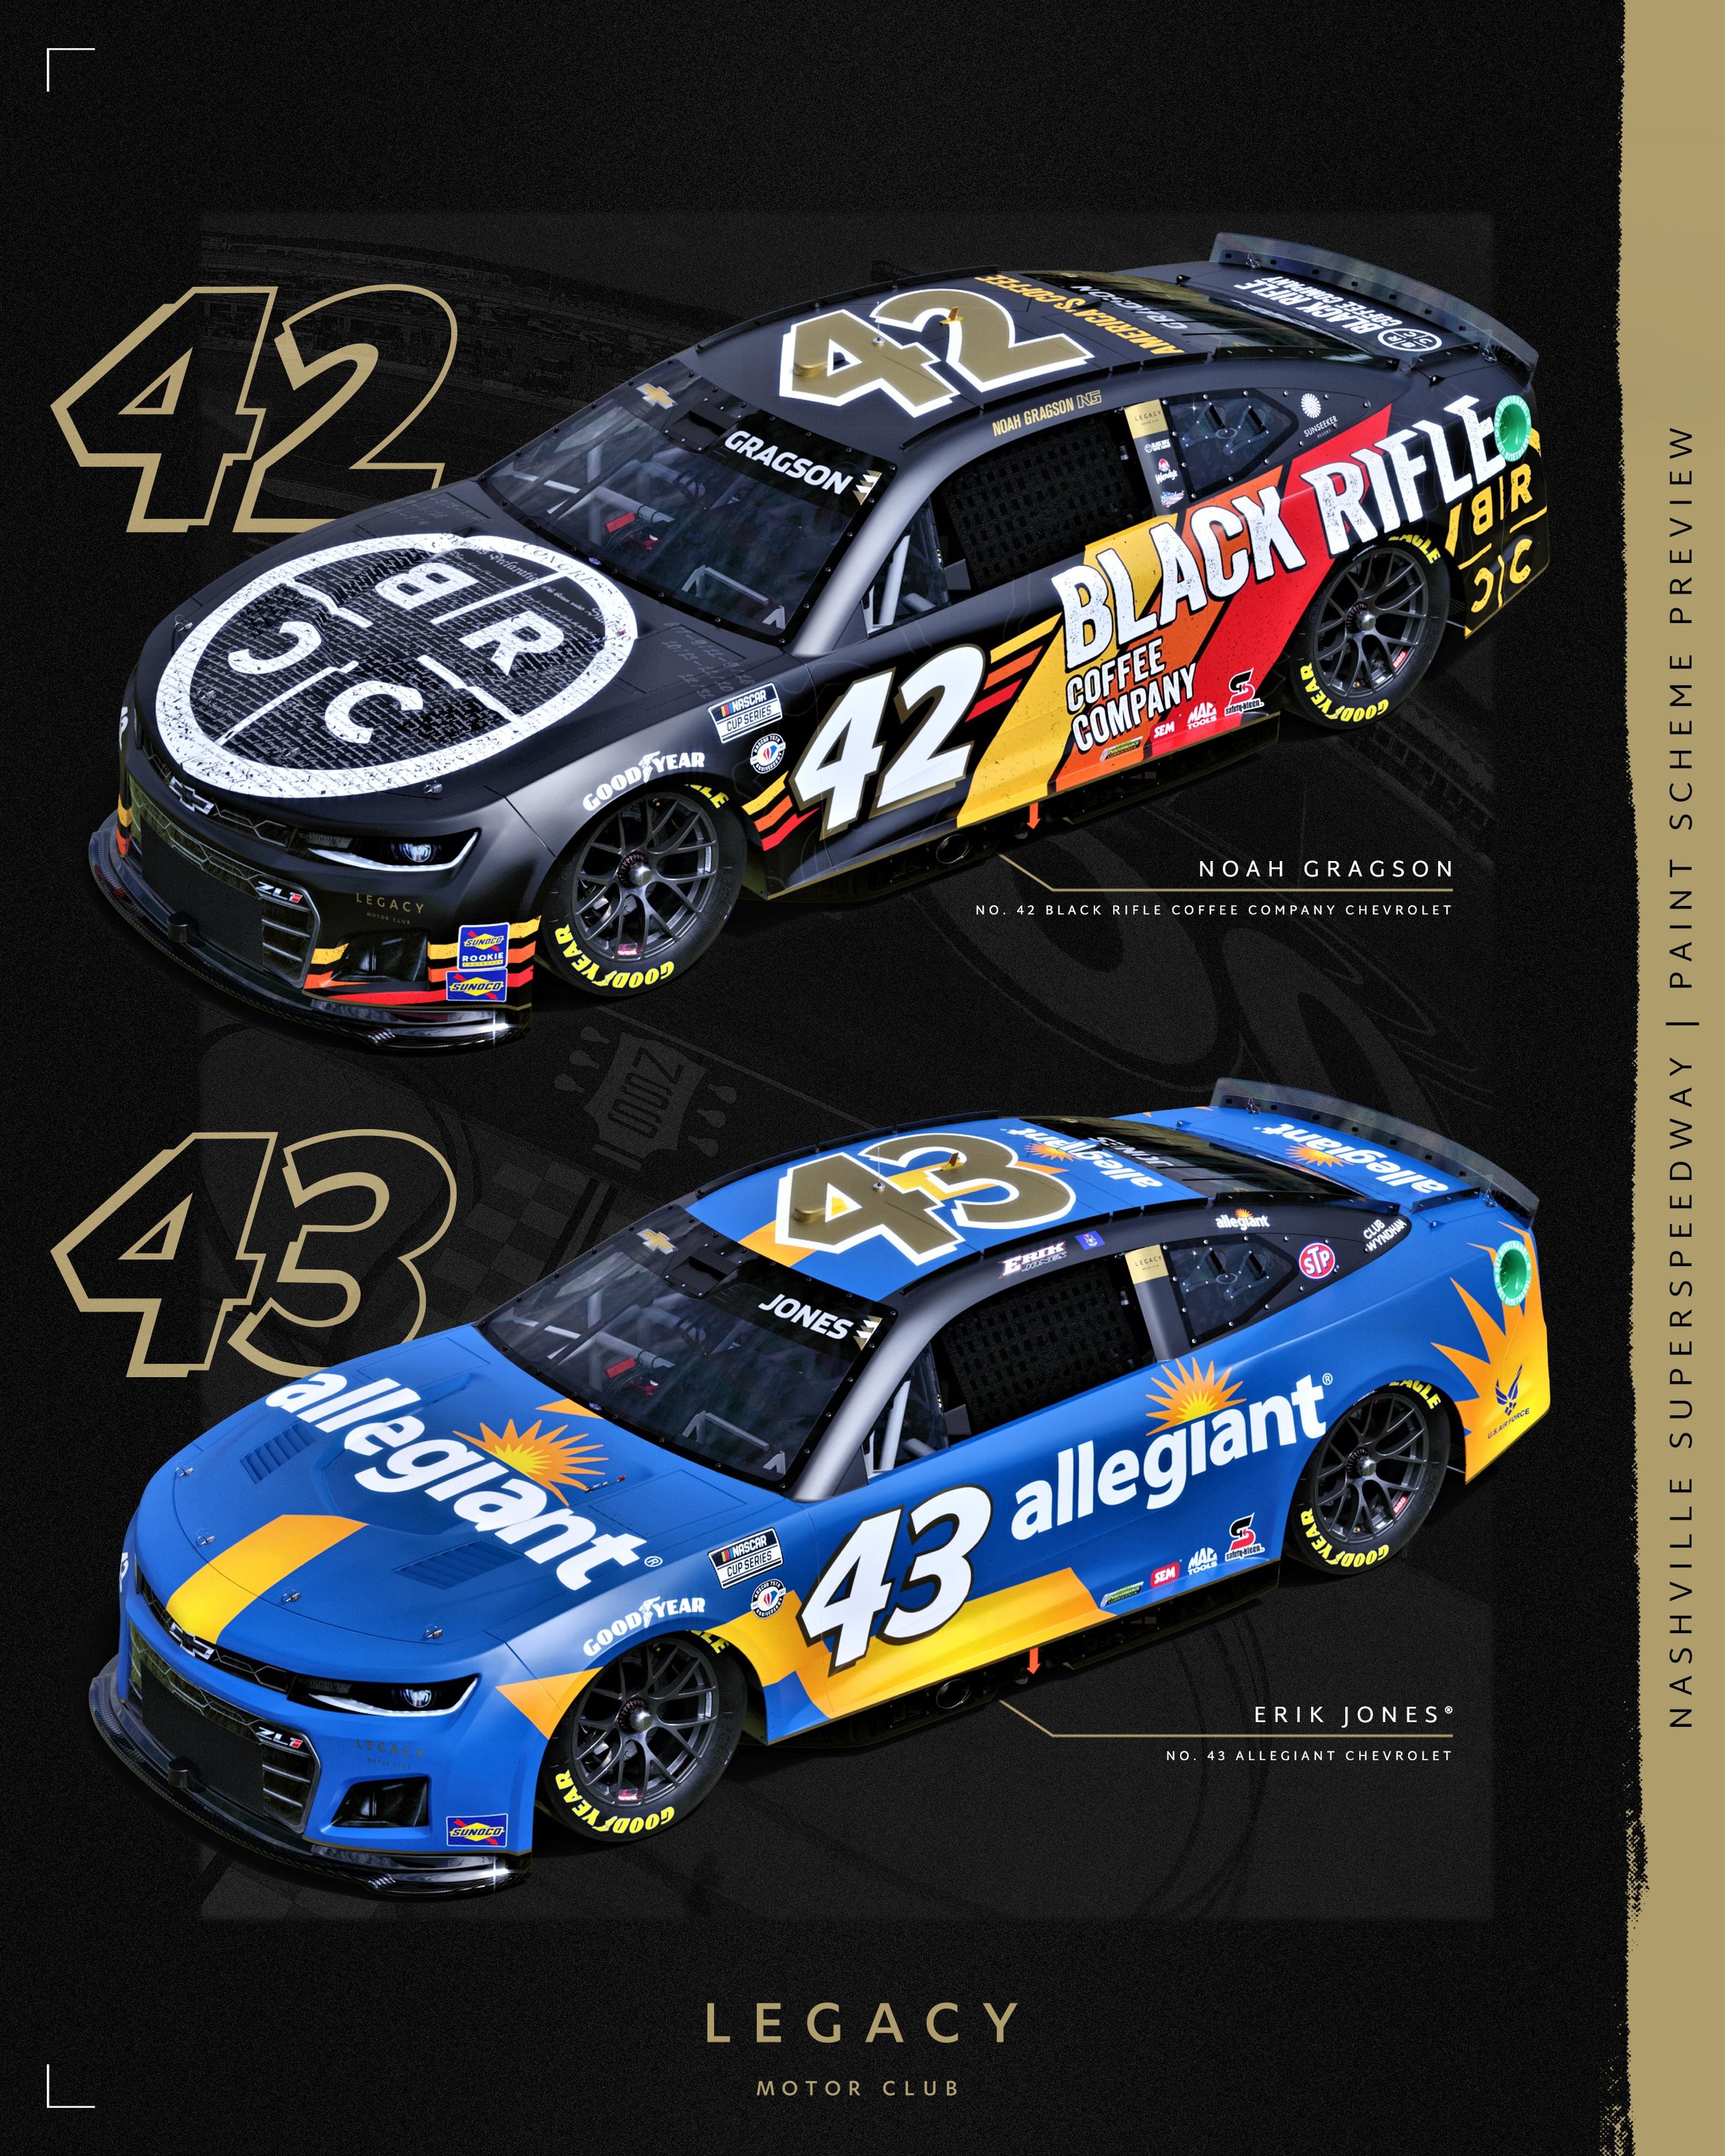 Nashville Superspeedway Ally 400 Race Preview — LEGACY MOTOR CLUB